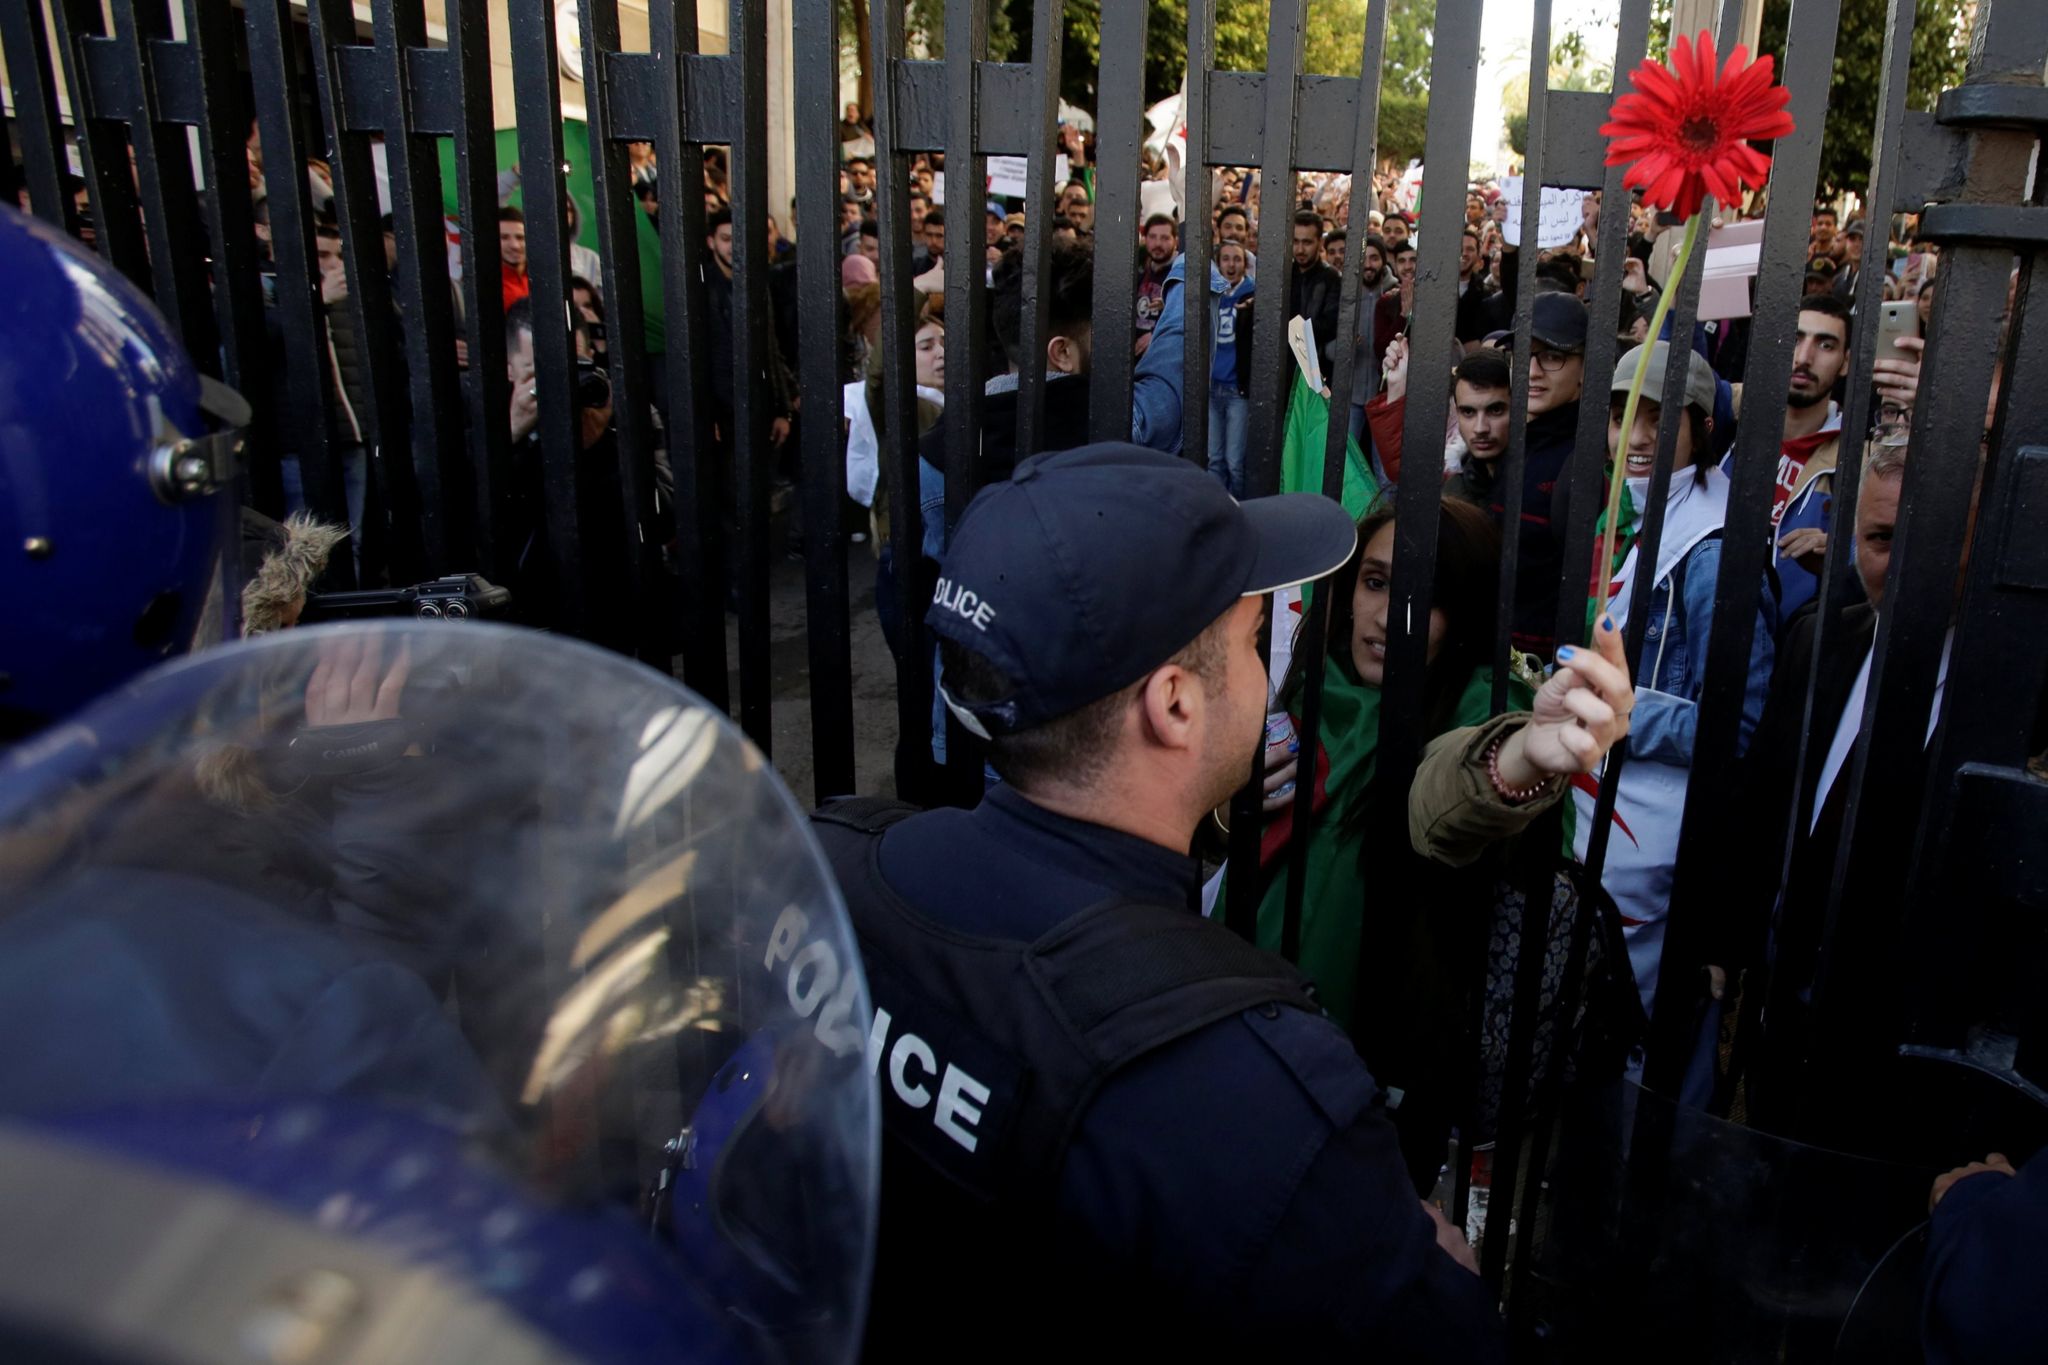 A student offers a flower to police while she protests with others inside a university campus against the fifth term of Abdelaziz Bouteflika in Algiers